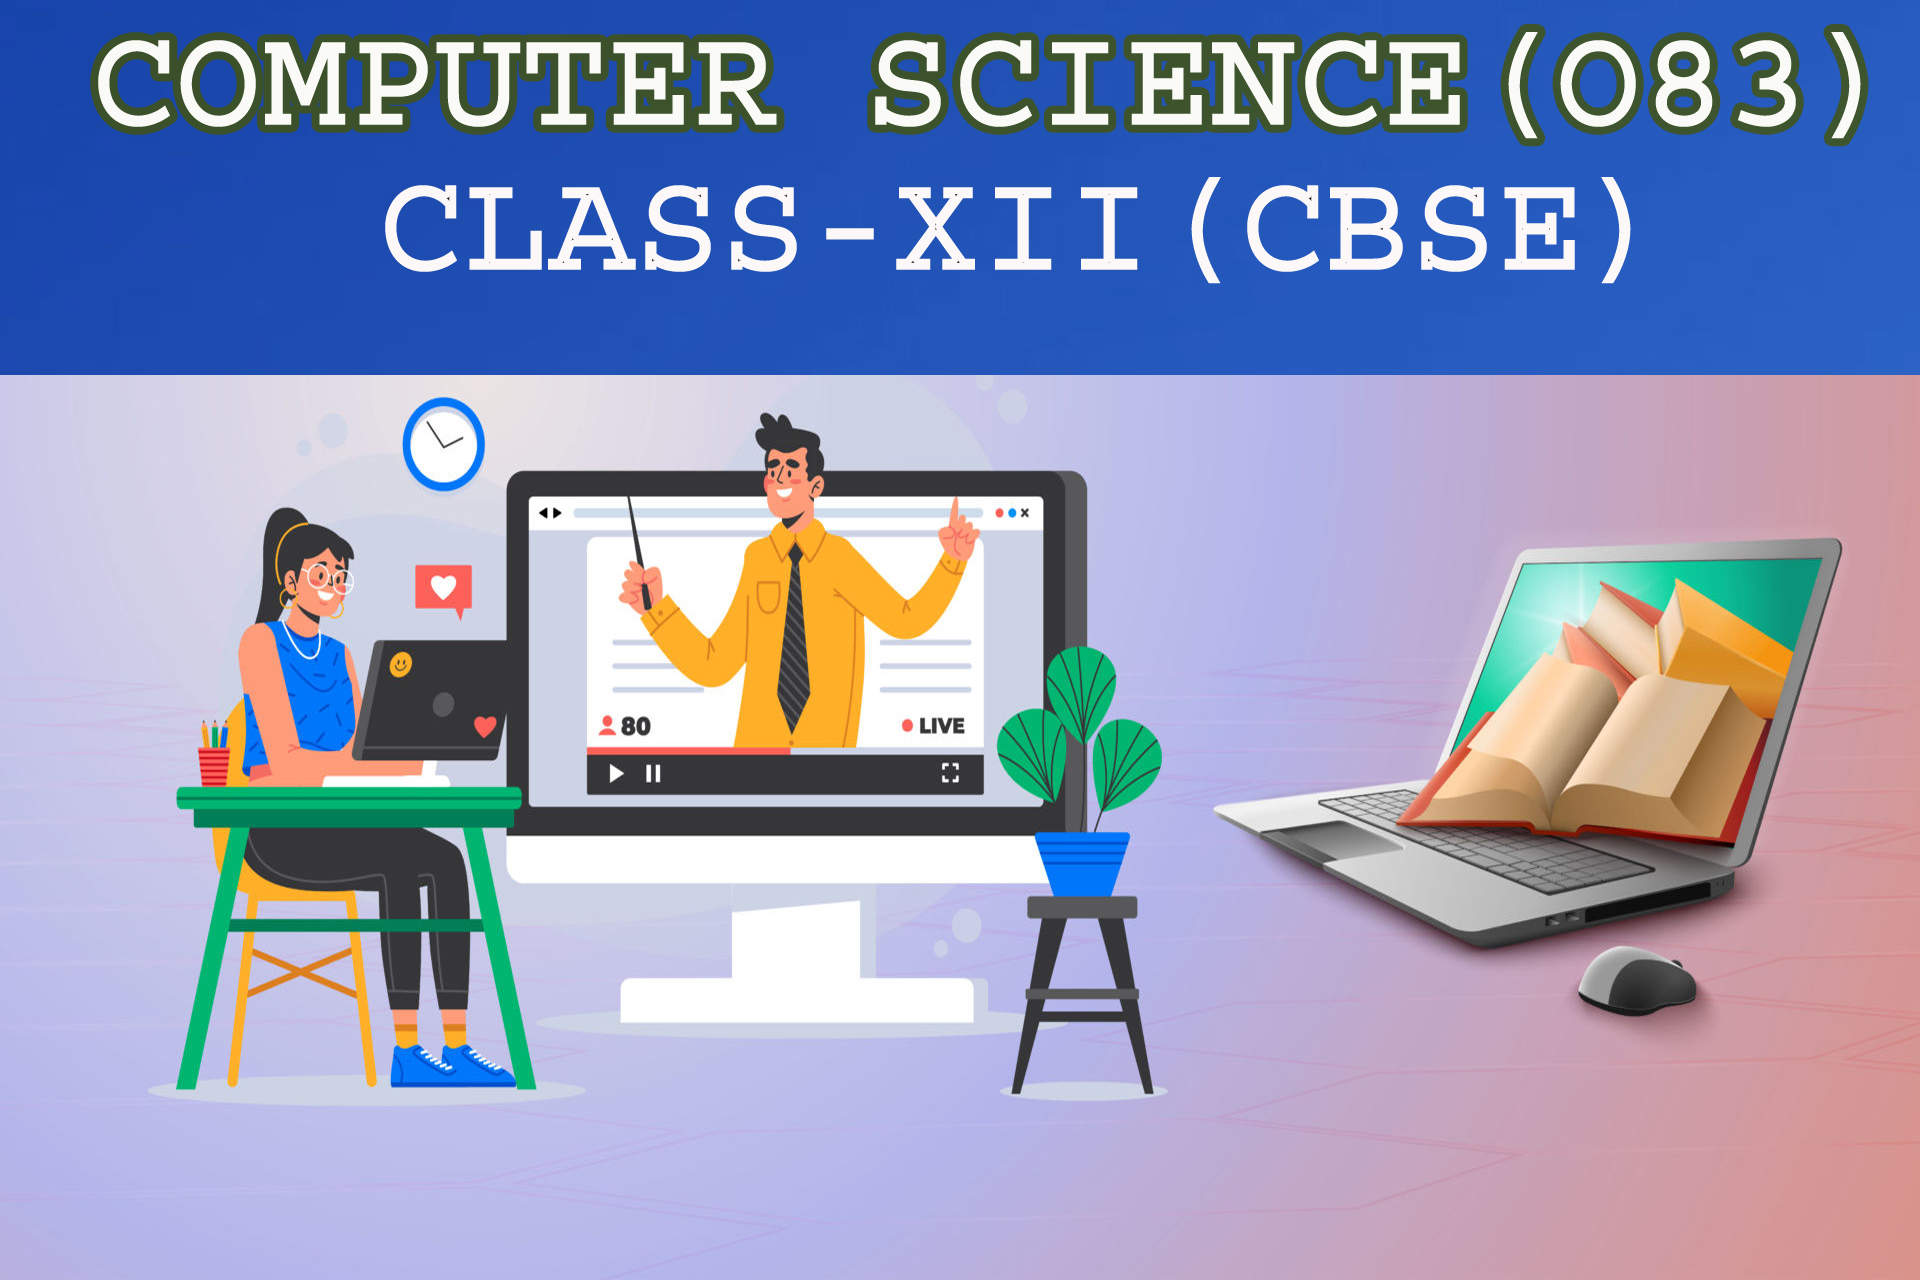 Computer Science Class-XII -( For CBSE students) : Subject Code-083